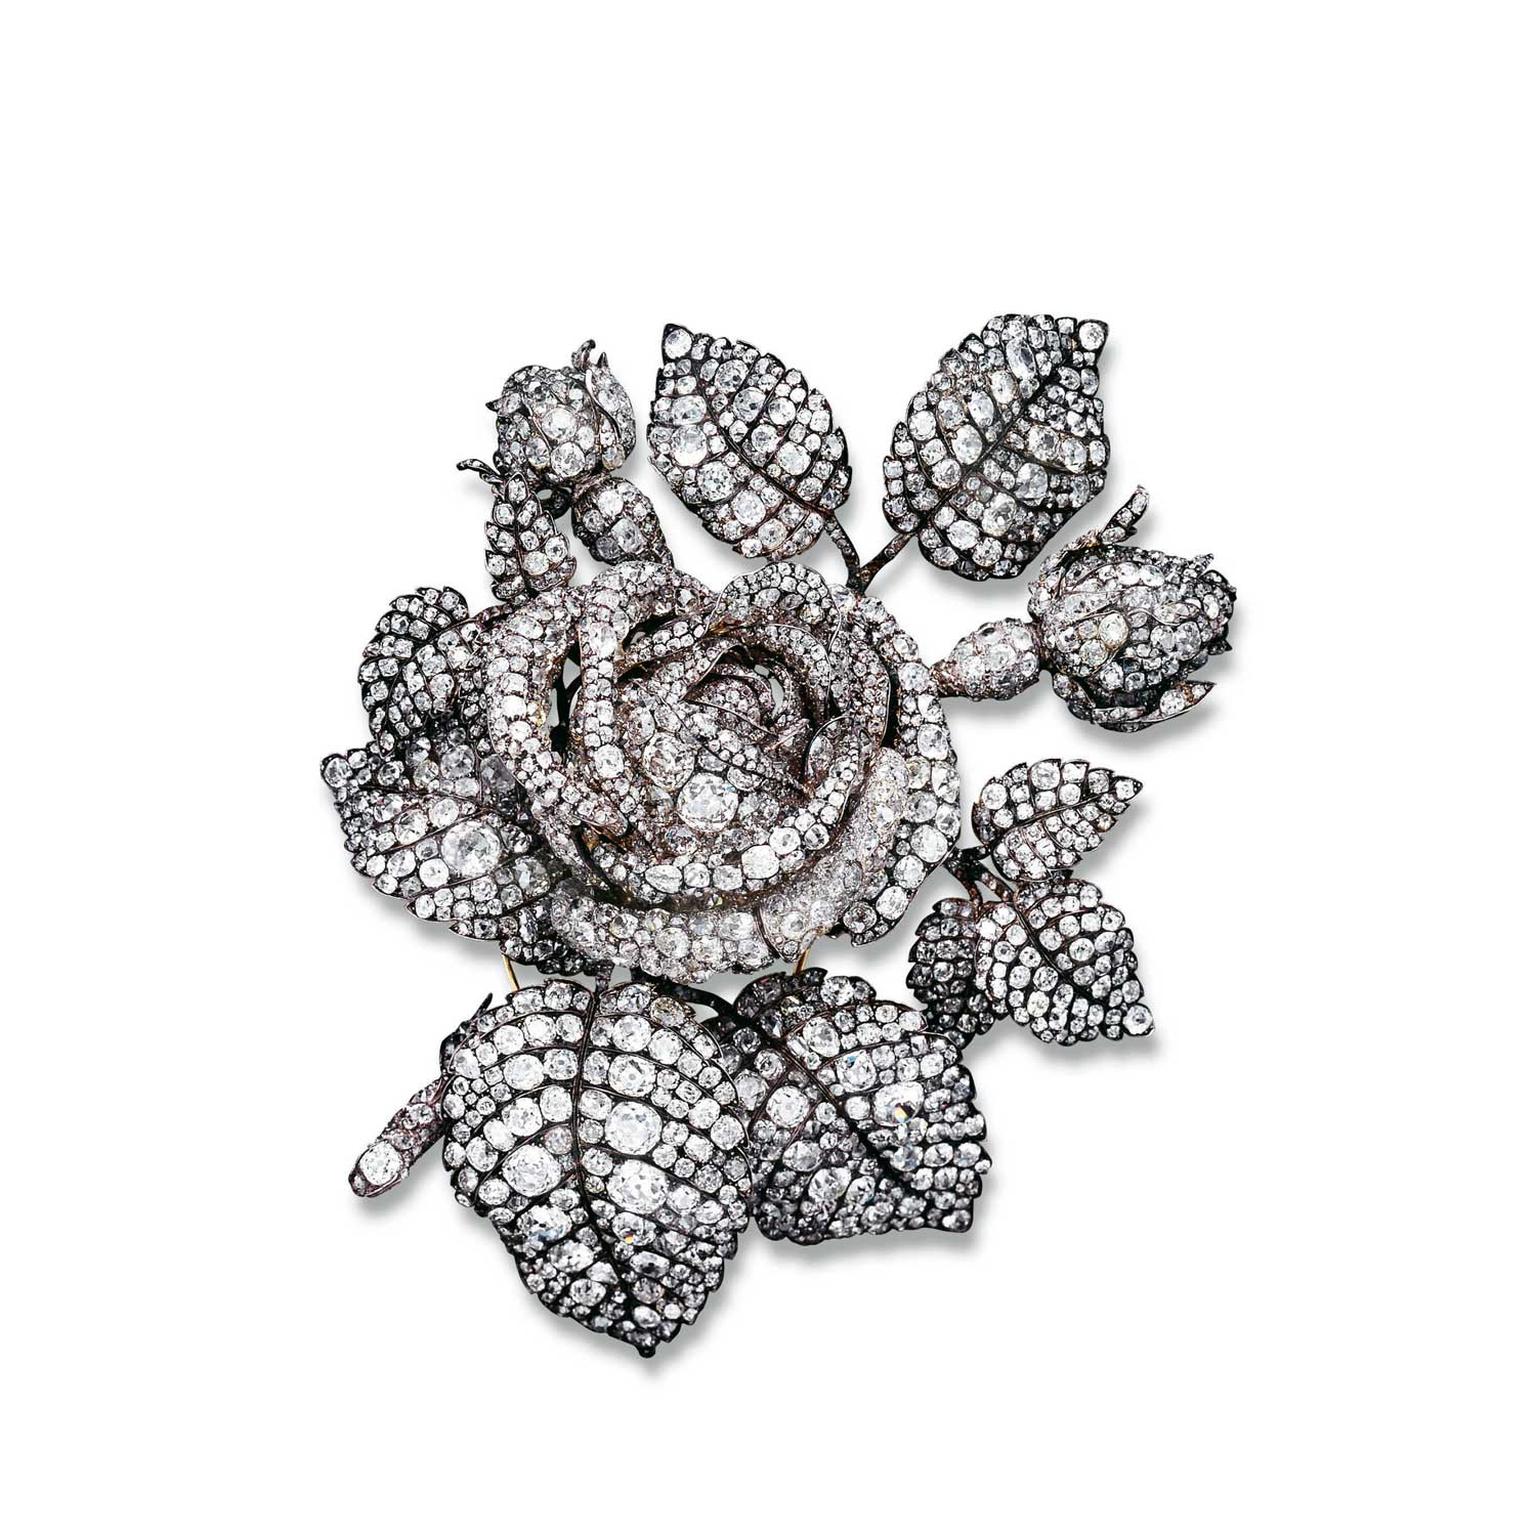 Mellerio dits Meller mid 19th century diamond rose brooch commissioned by Princess Mathilda